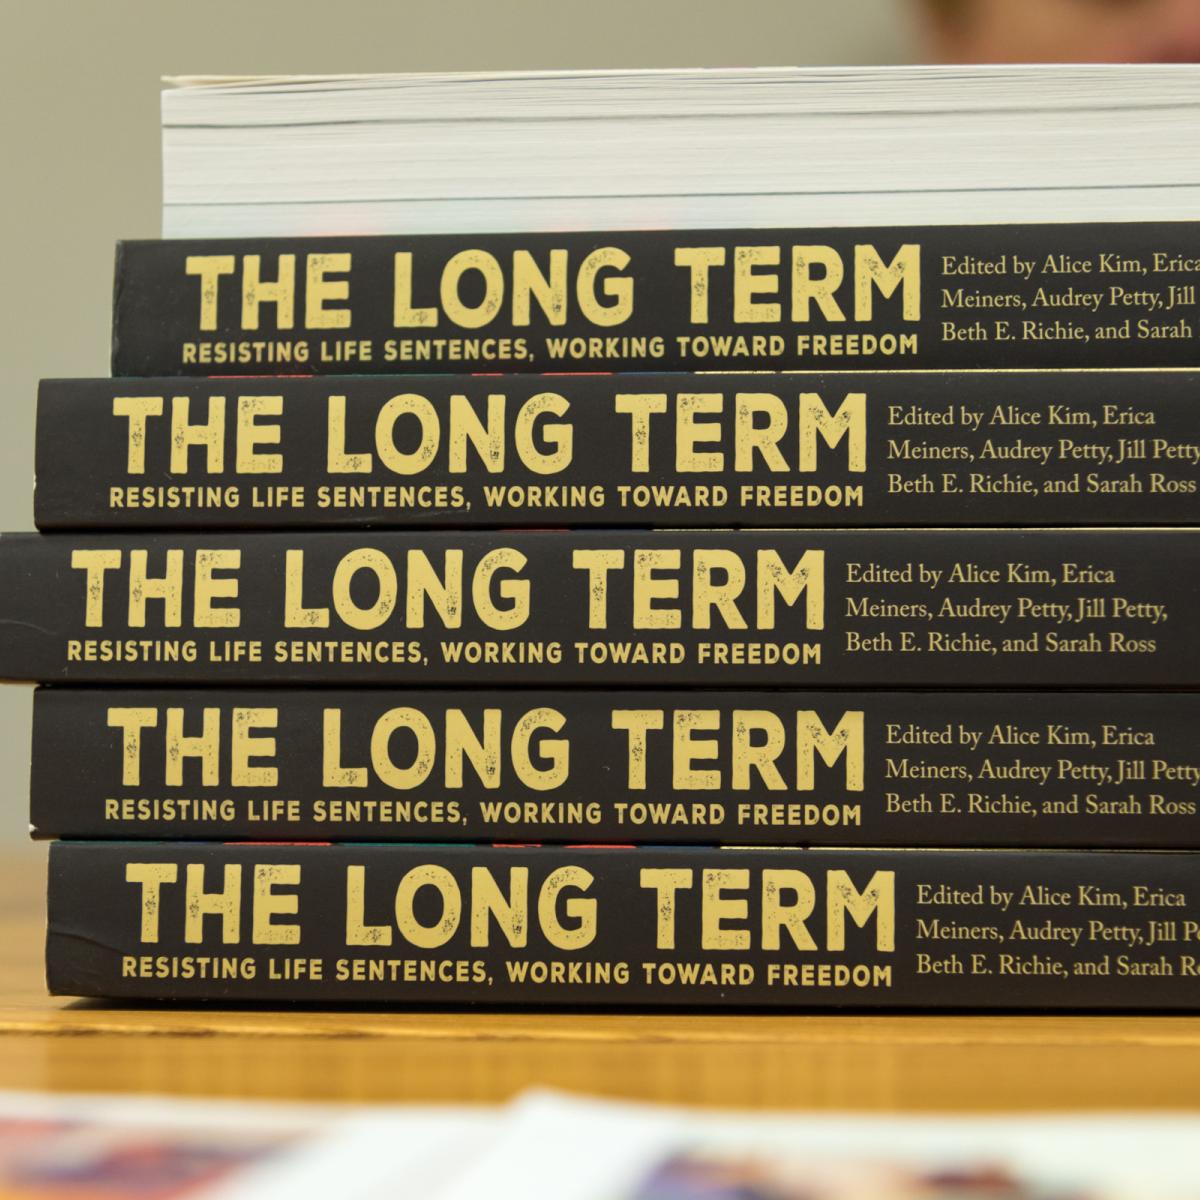 Human Rights Books: The Long Term